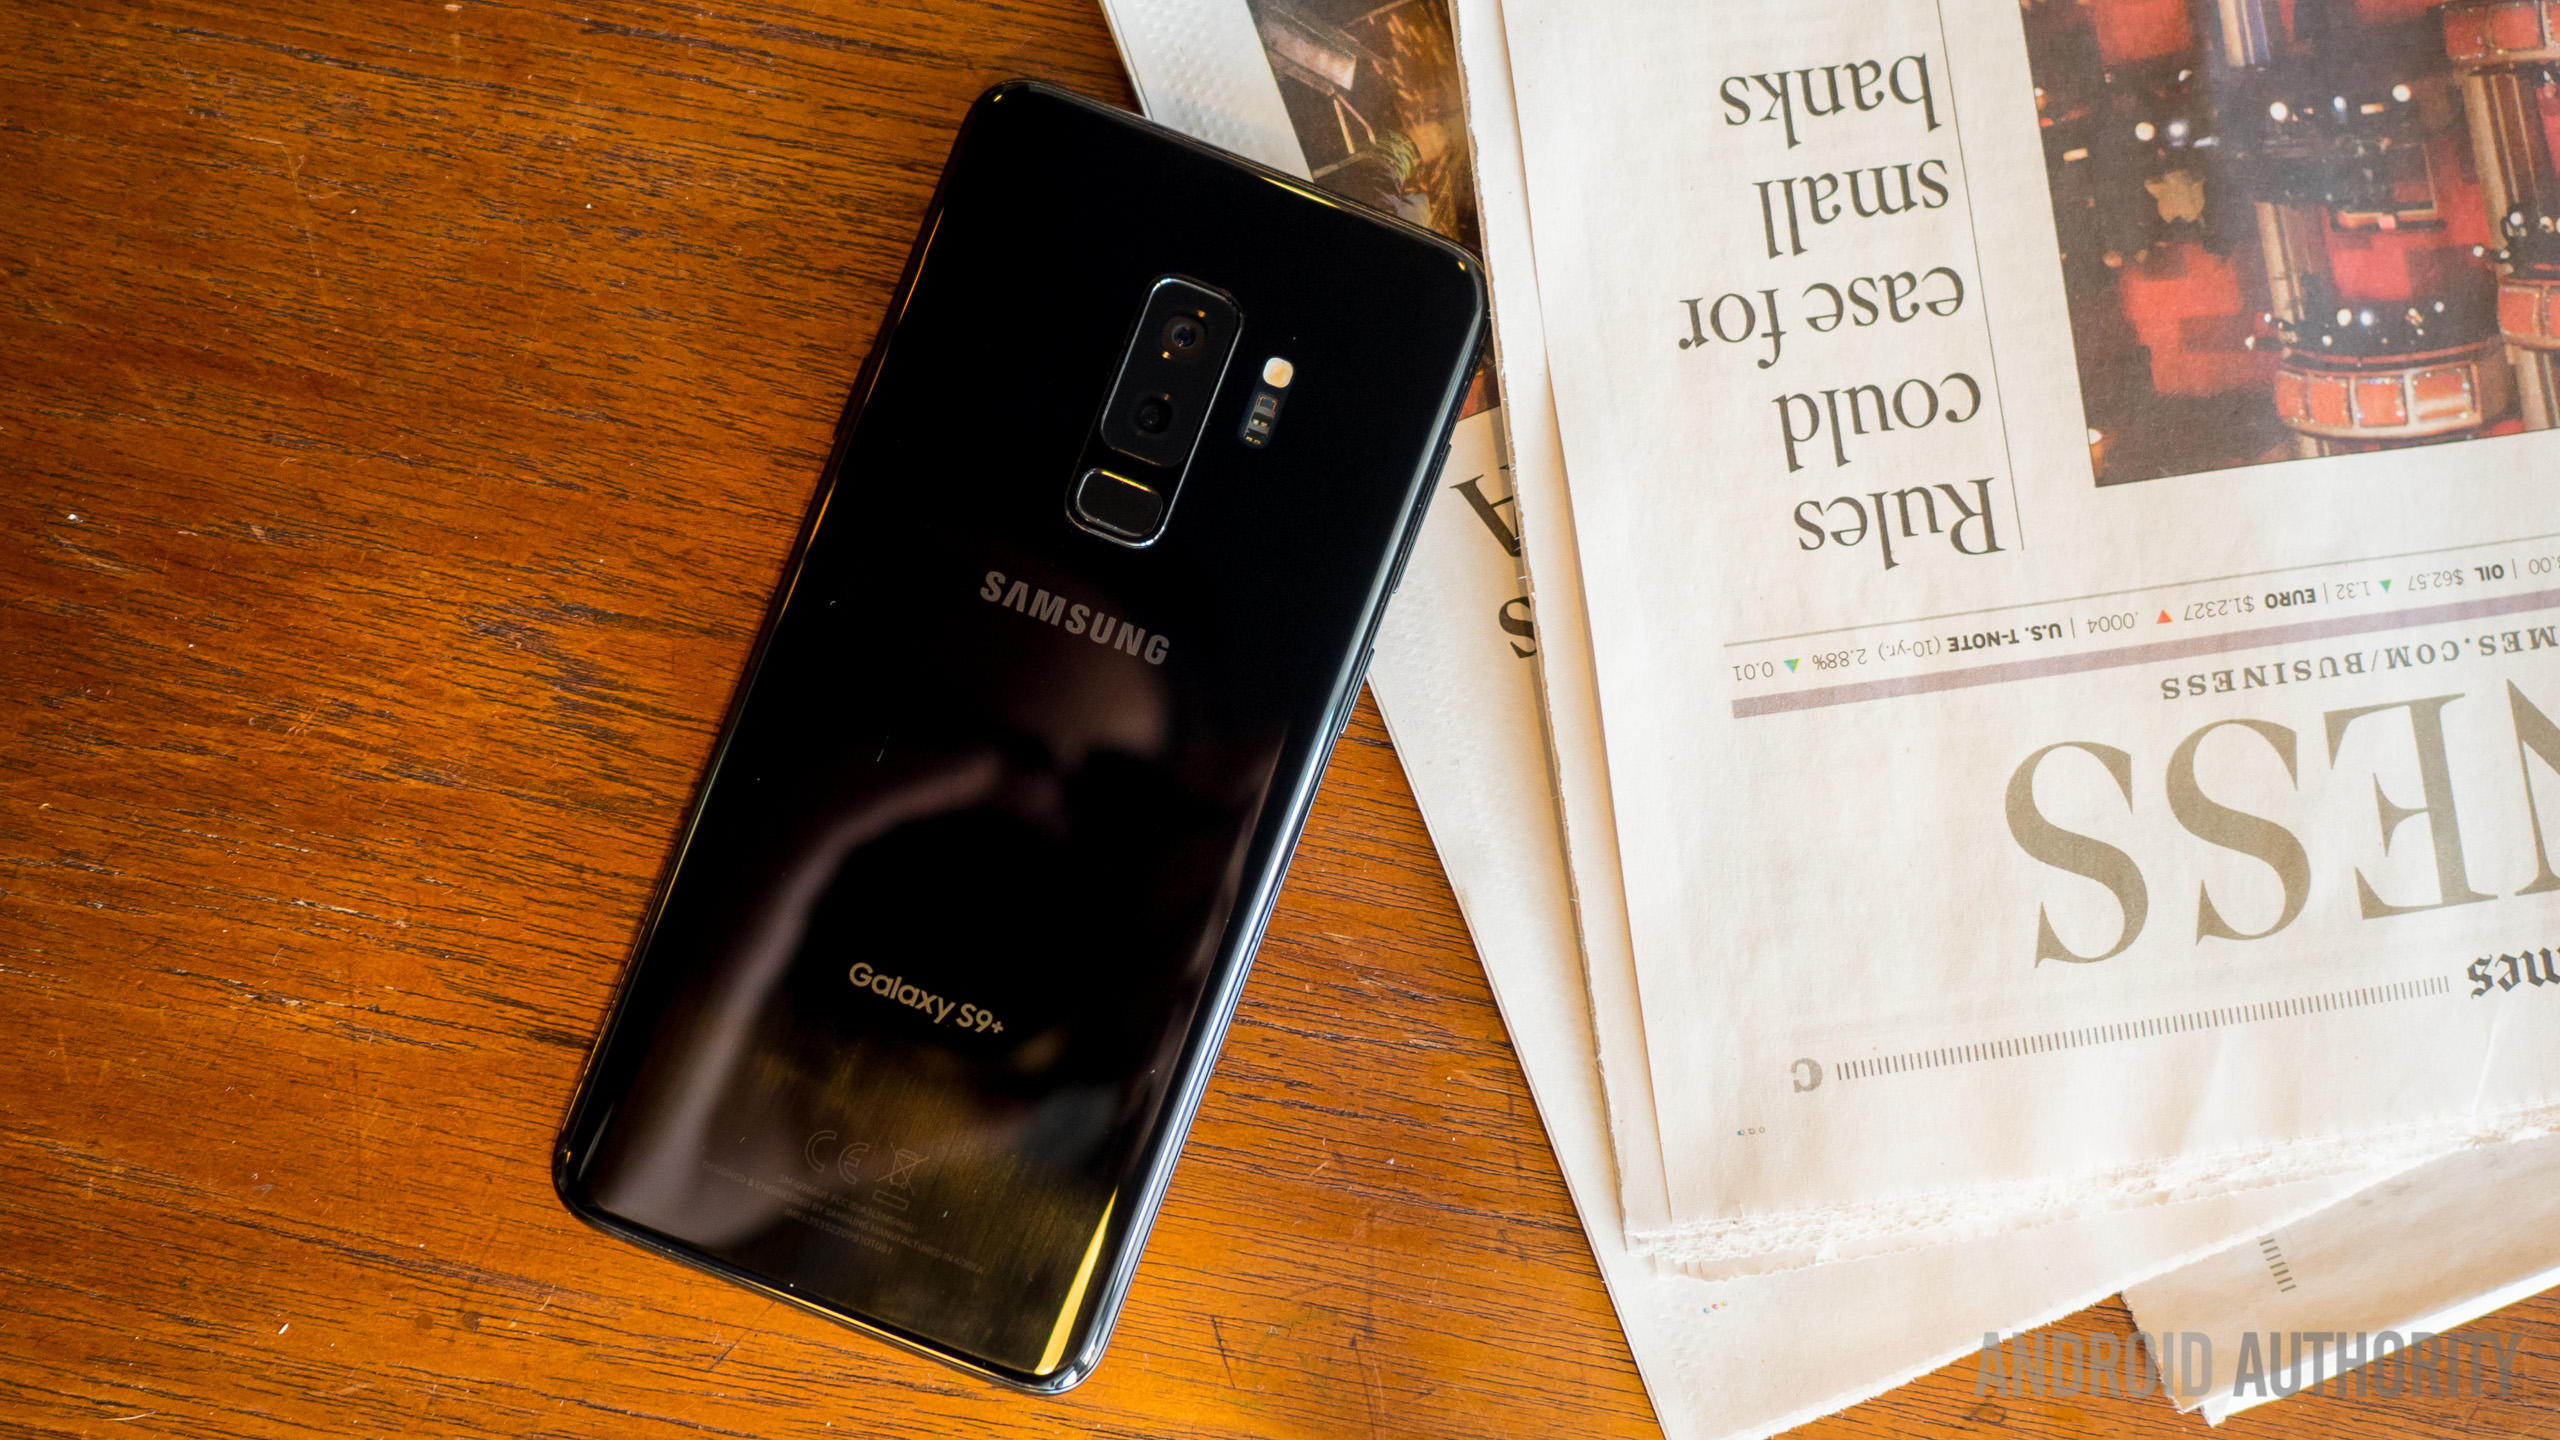 Unlocked Samsung Galaxy S9 devices should gain FM radio access next update - Android Authority